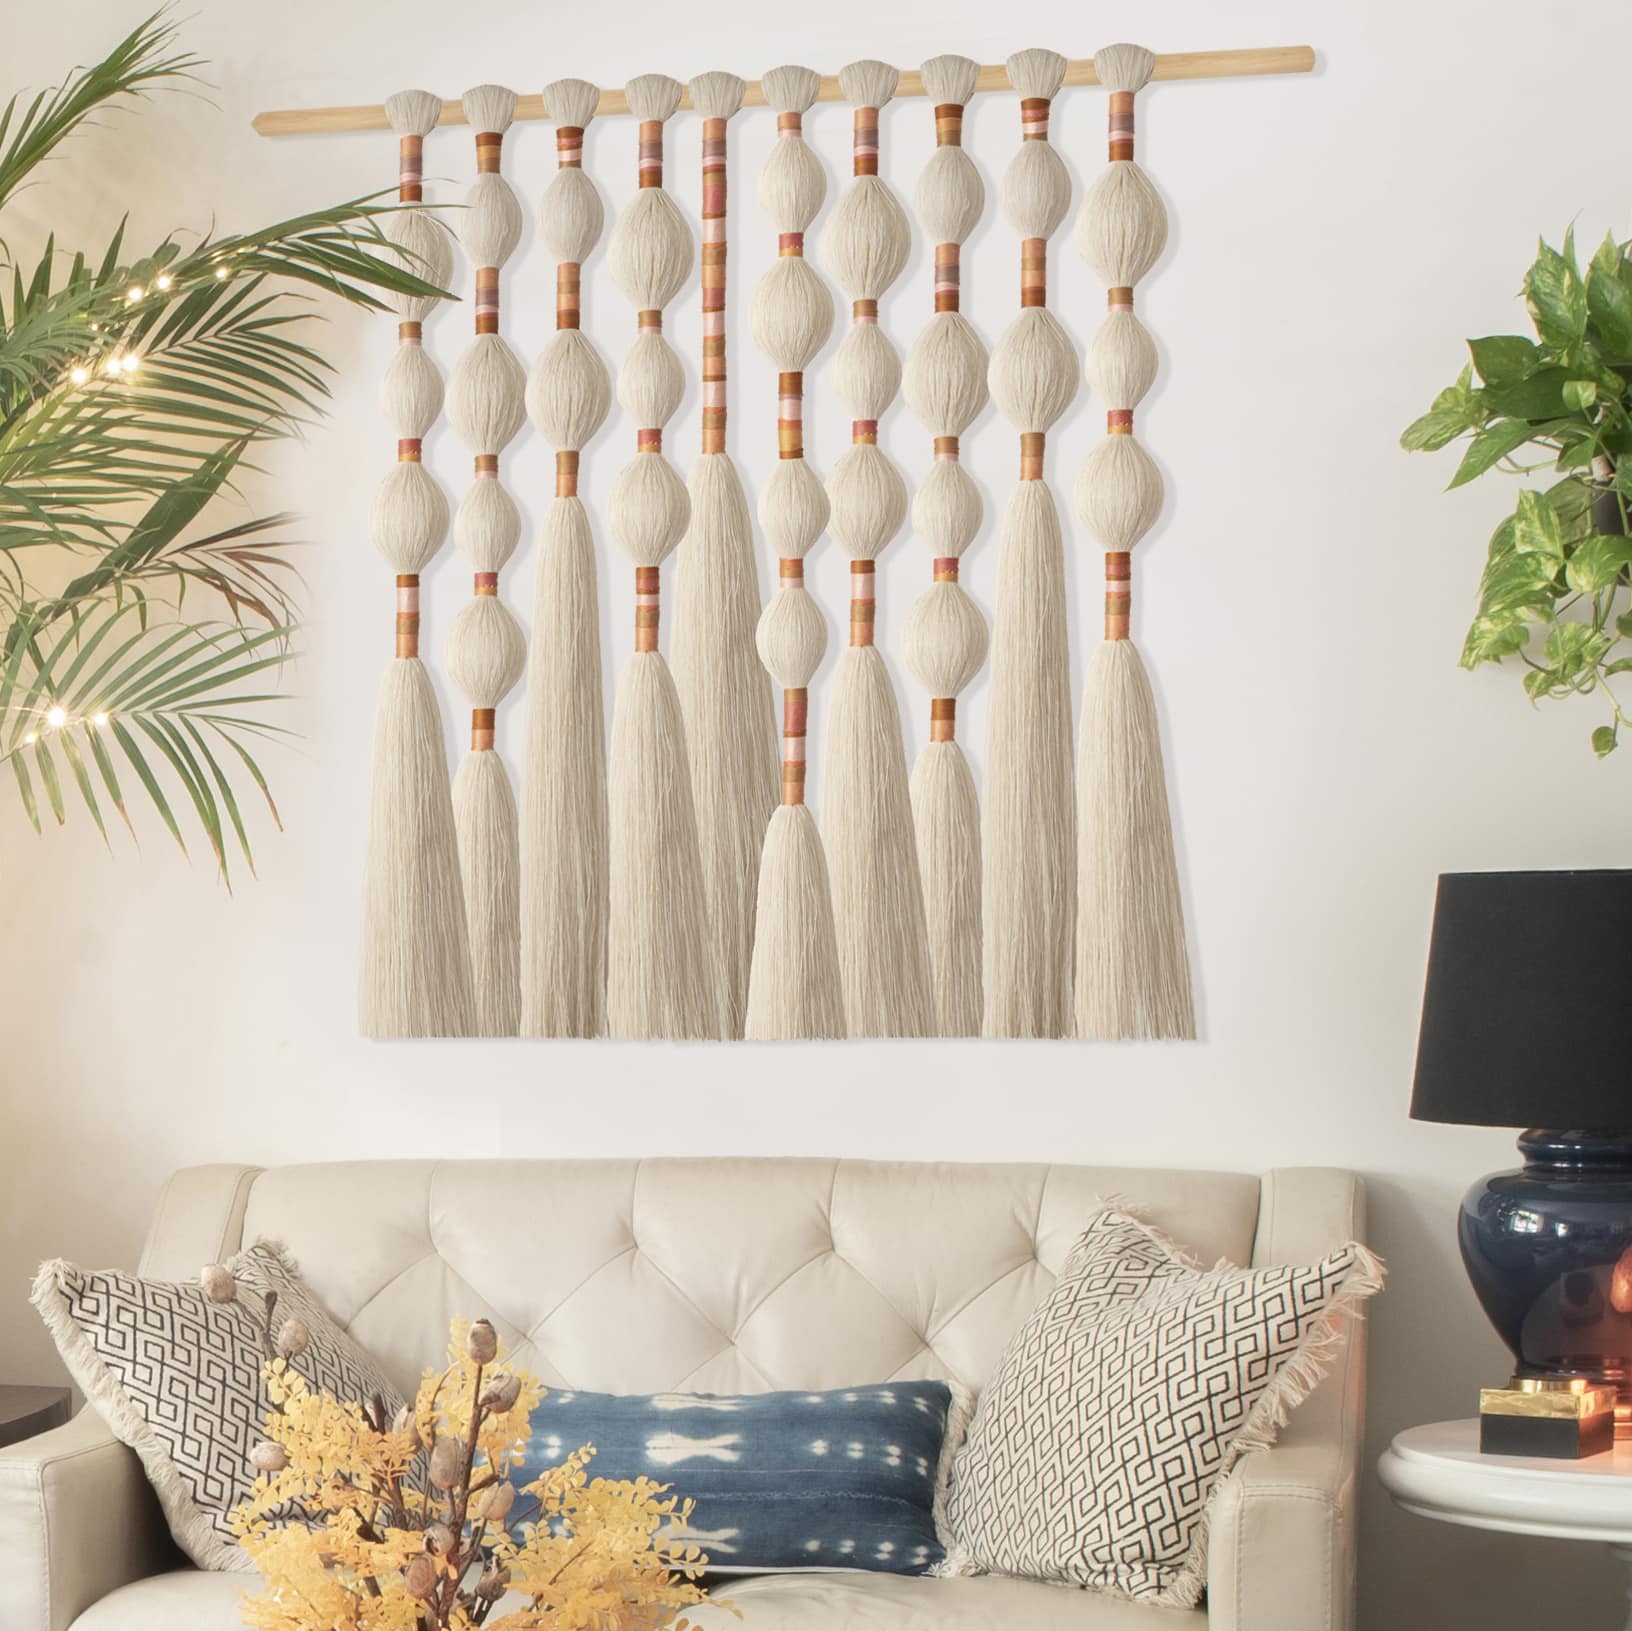 How to make long narrow wall art using combed macrame yarn and embroidery floss